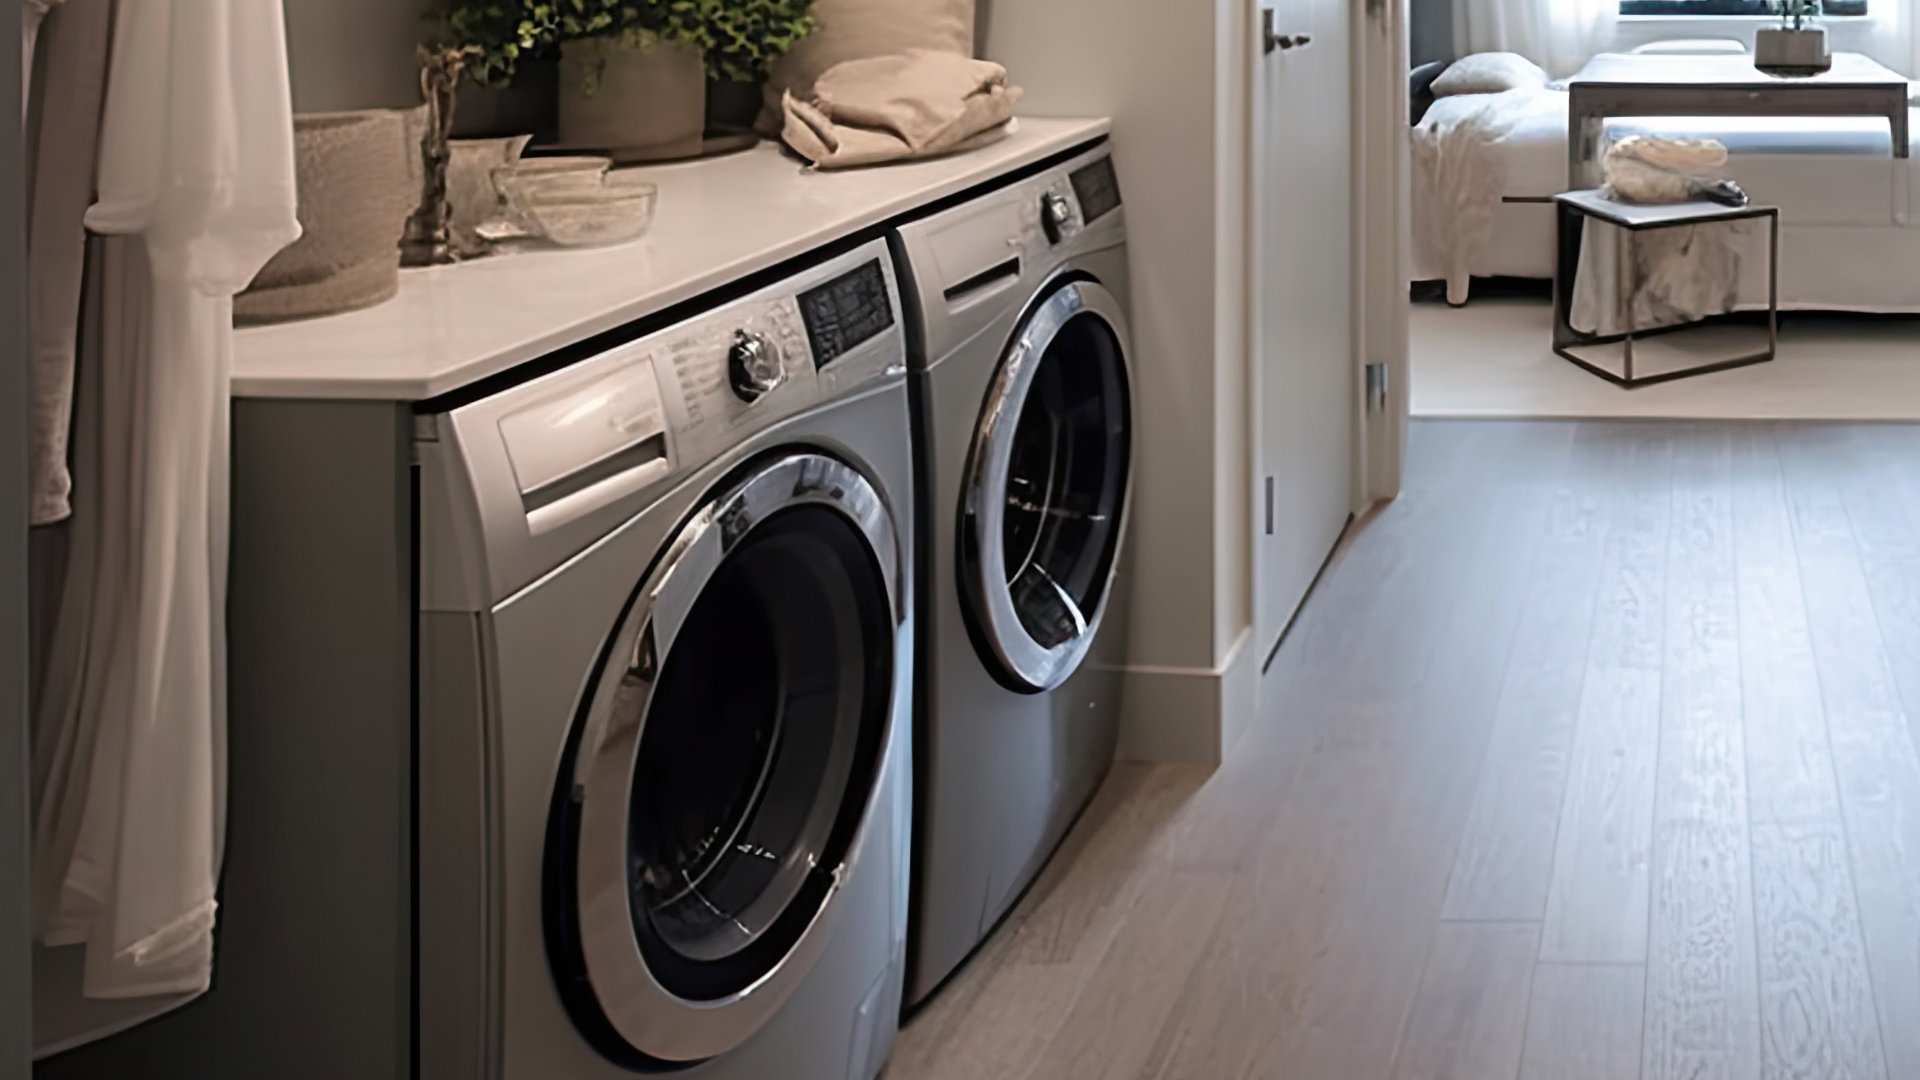 Featured image for “Whirlpool Duet Washer Door Locked? Here’s What to Do”